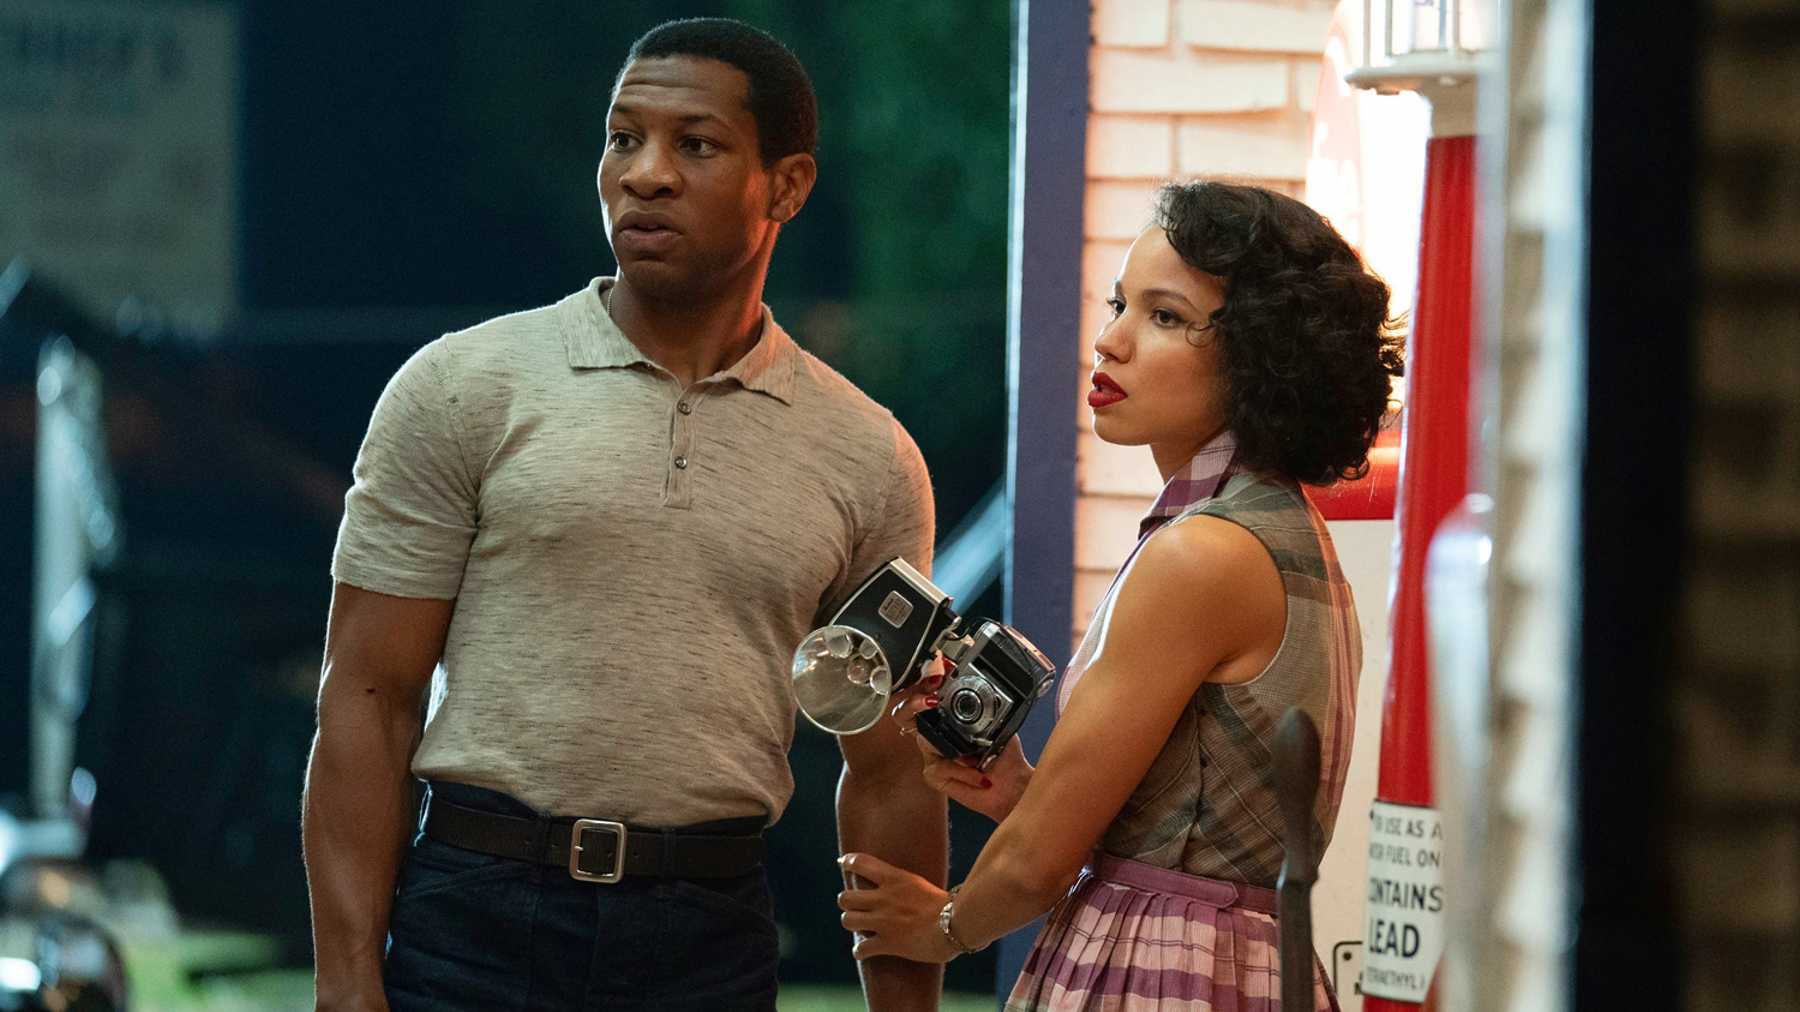 Atticus (Jonathan Majors) and Leticia (Jurnee Smollett) in Lovecraft Country. (Photo credit: HBO)